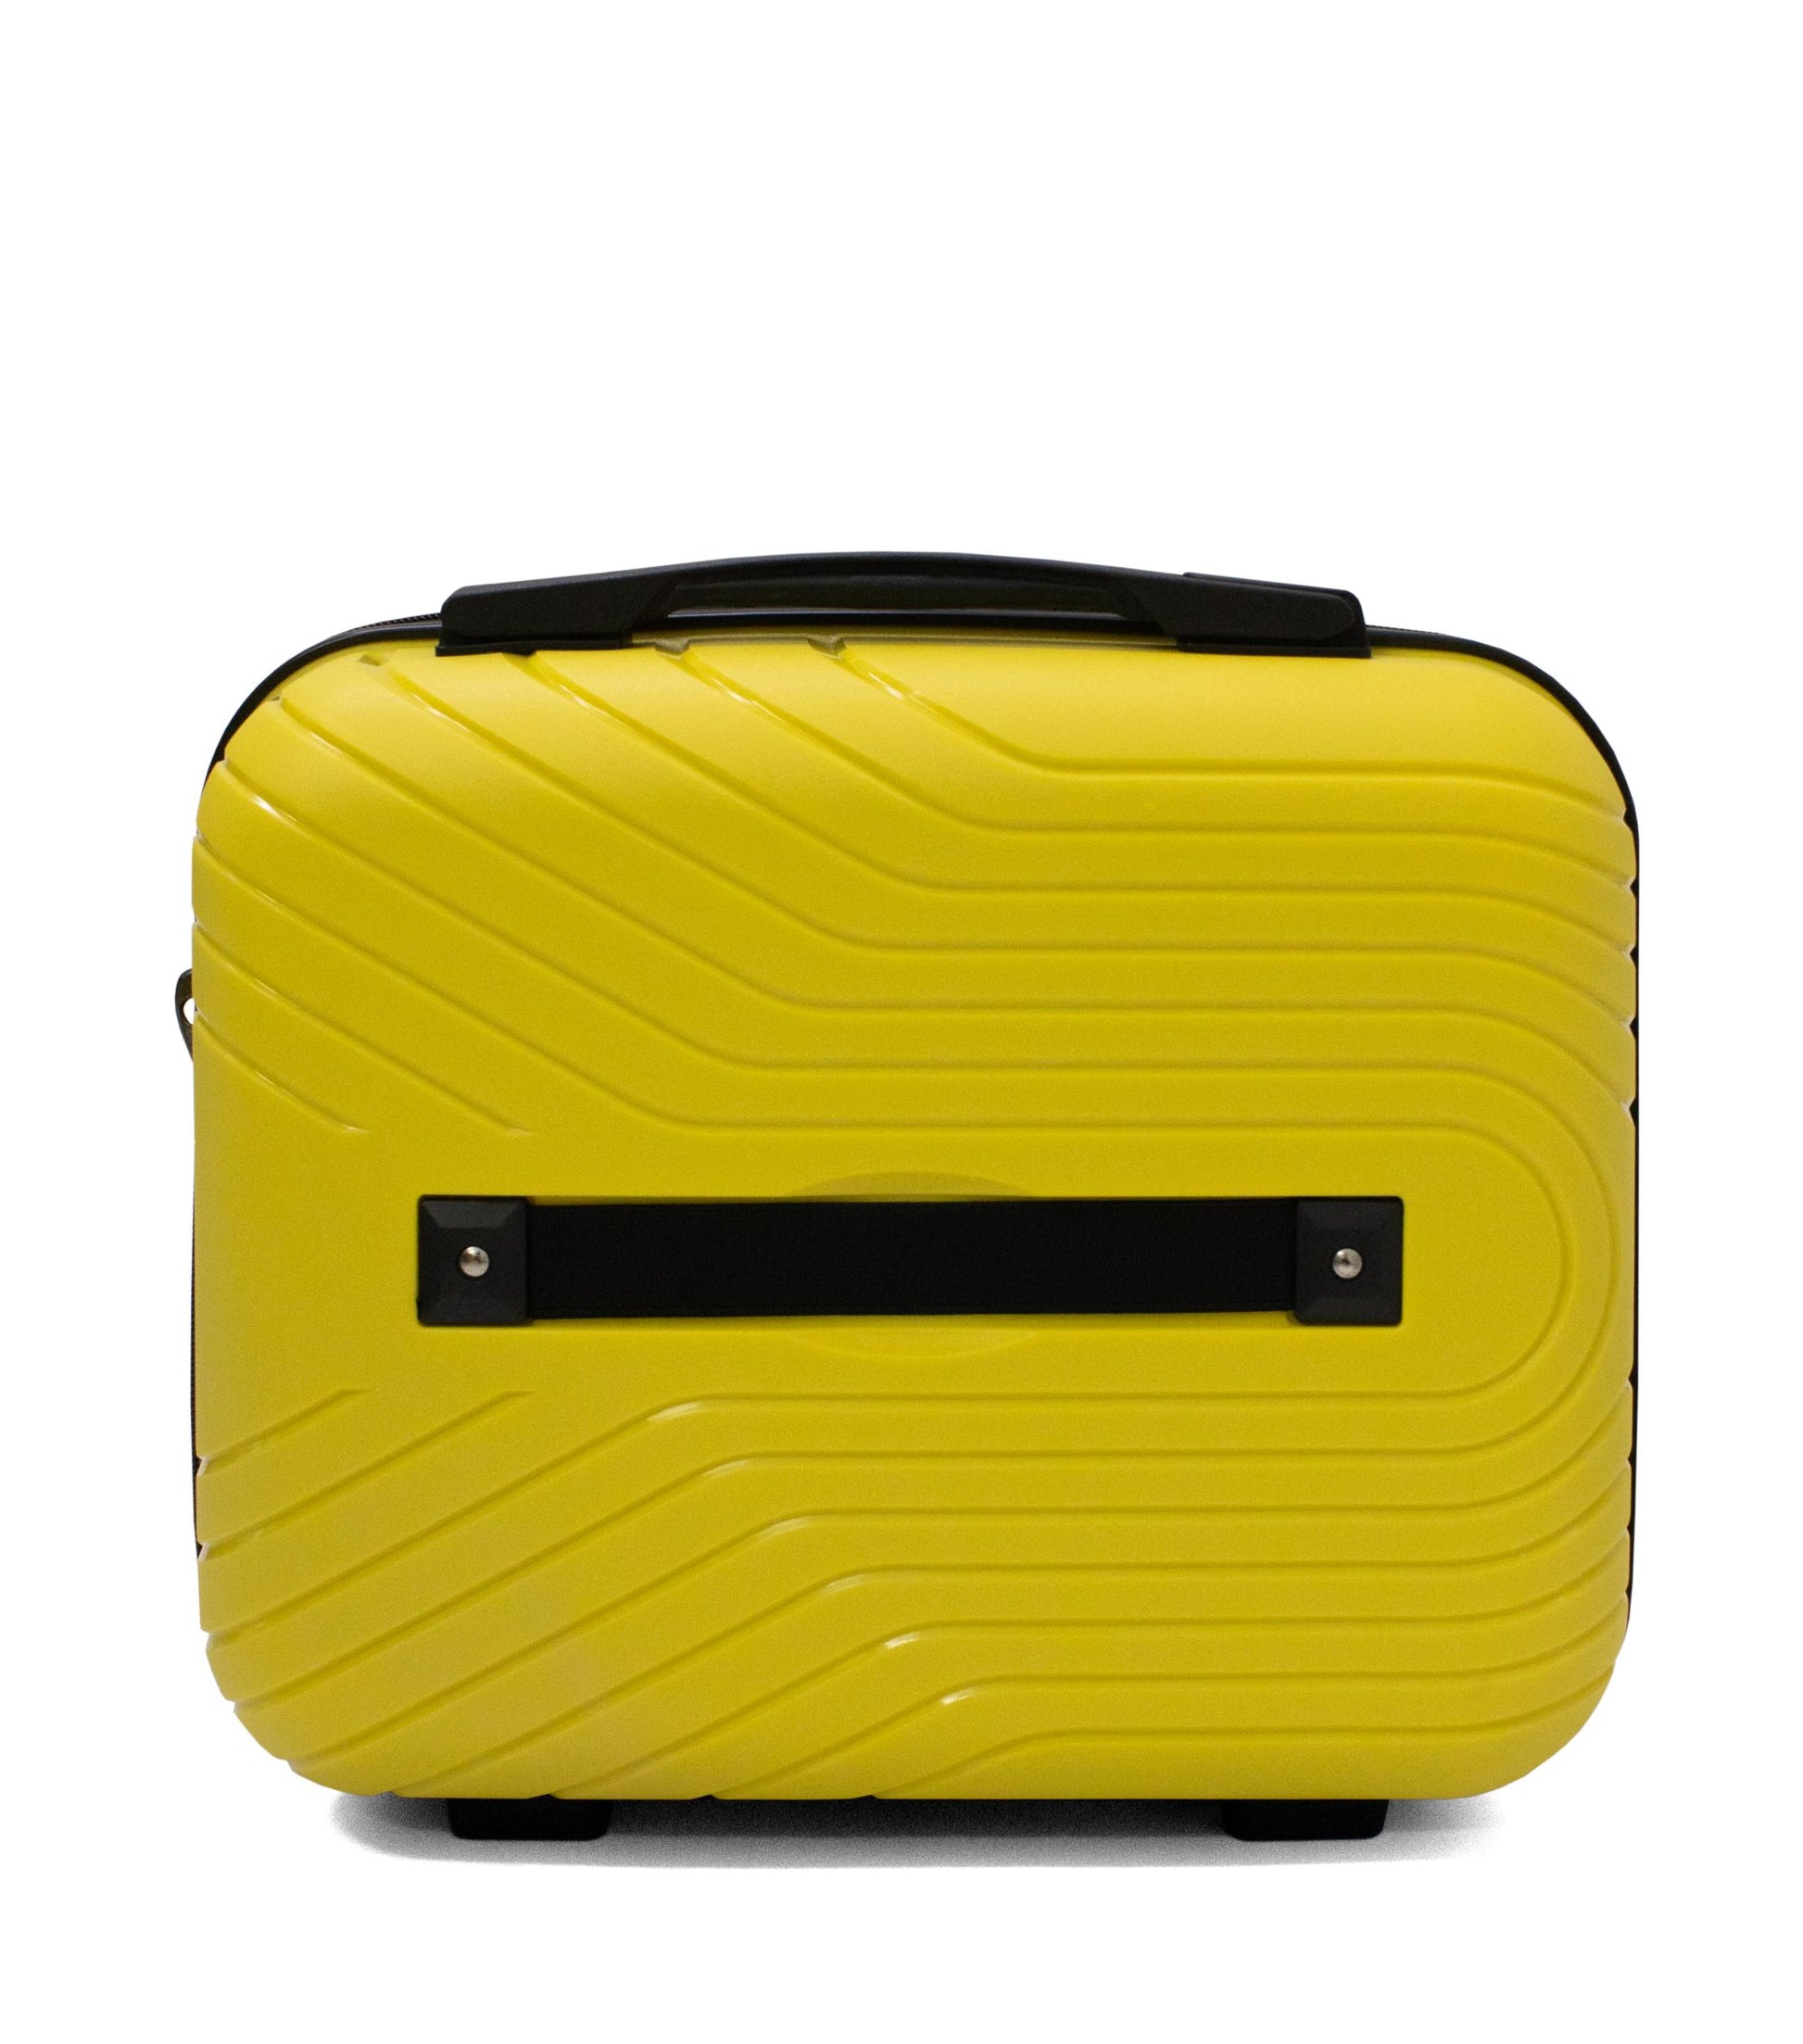 Cavalinho Colorful Hardside Toiletry Tote (15") - 15 inch Yellow - 68020004.08.15_3